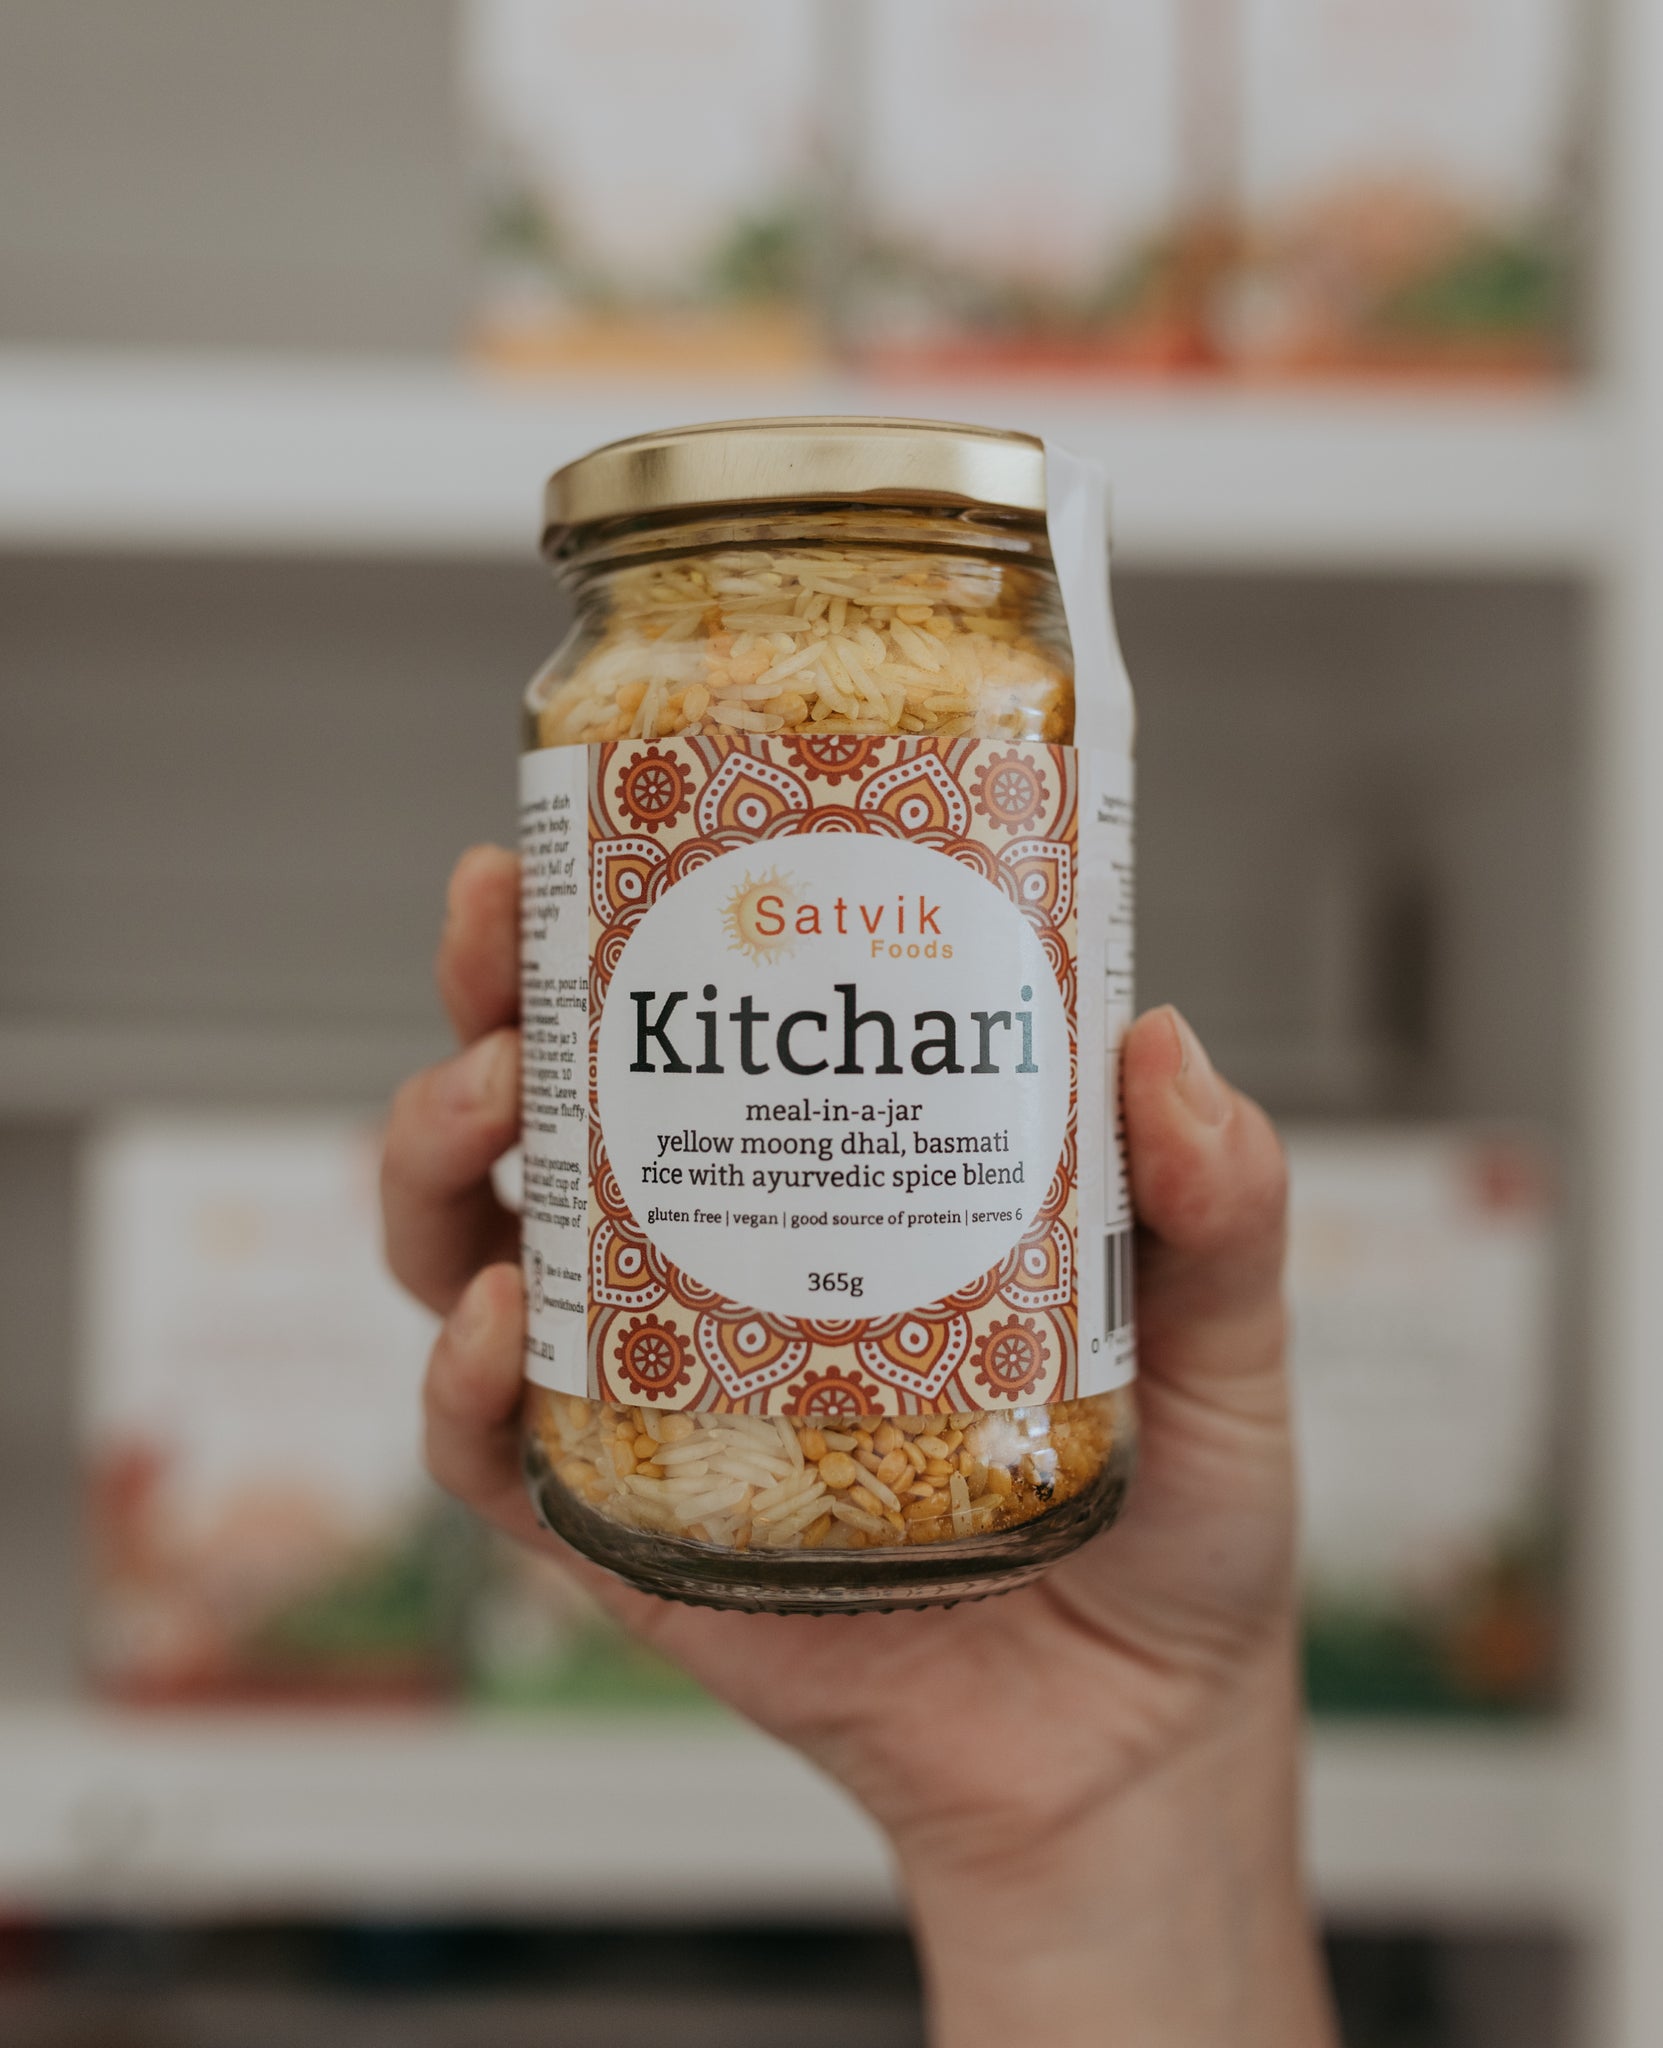 Satvik Foods Kitchari is a nutritious and easy-to-prepare meal option that is available for purchase online. The product is a traditional Ayurvedic dish made with organic basmati rice, split mung beans, and a blend of warming spices. 